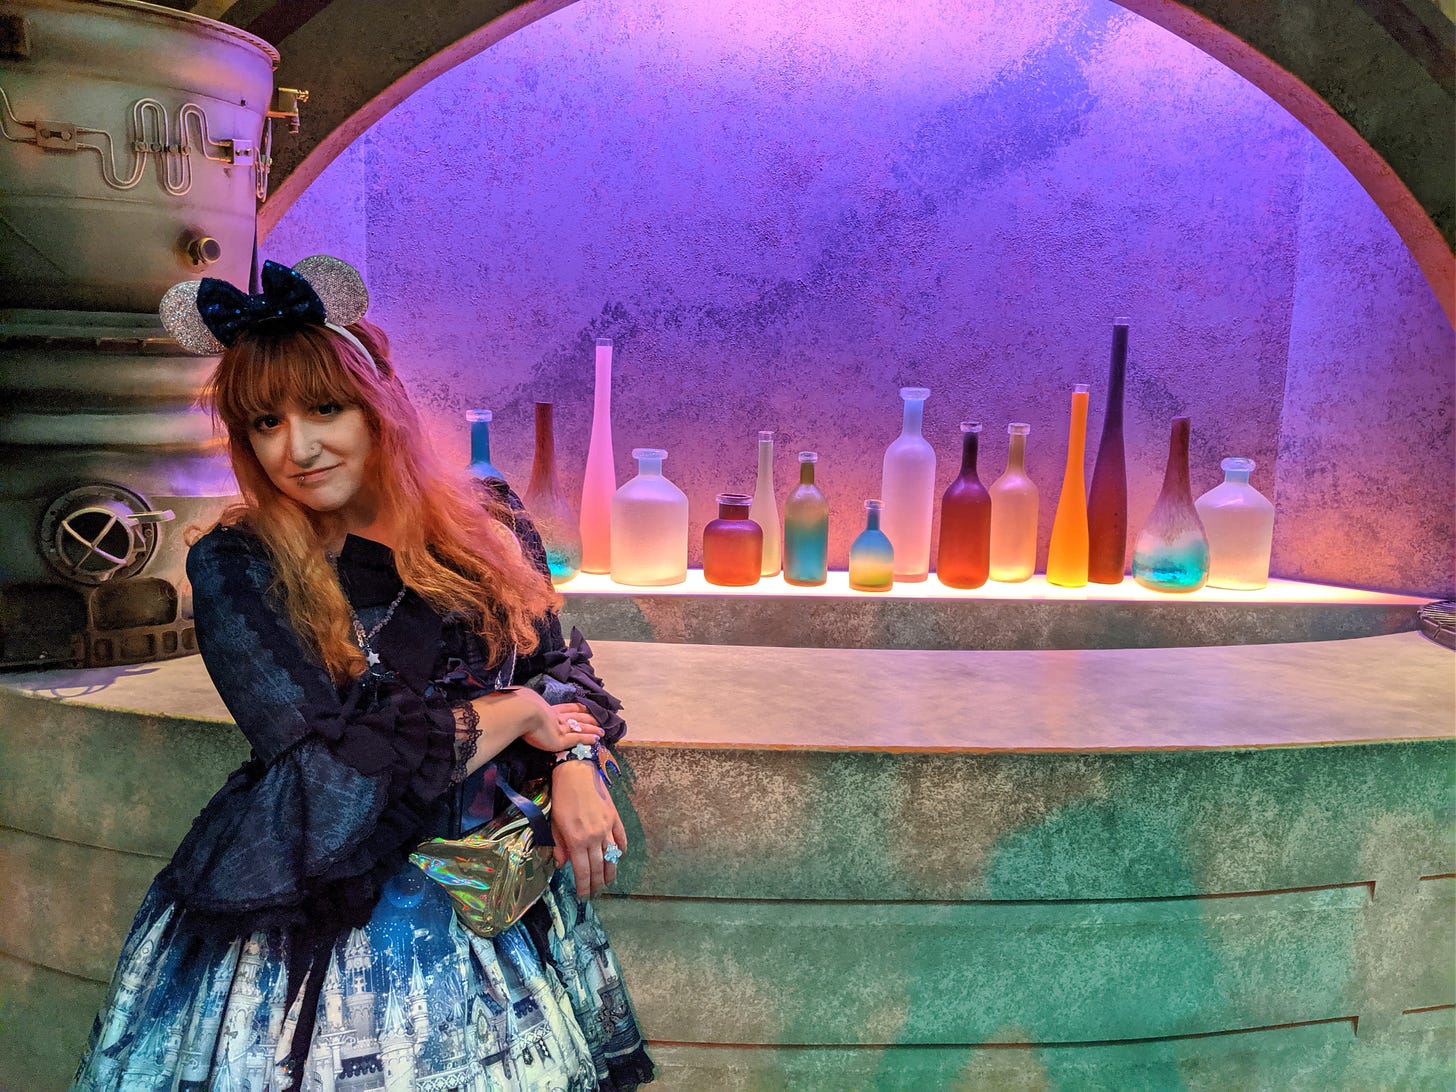 Photo taken in 2019 at Disneyland. Nif (a white femme with red/orange hair) is wearing glittery silver mouse ears with a navy sequined bow. She is wearing Angelic Pretty’s Castle Mirage princess sleeve OP in navy, with a metallic gold fanny pack, and an assortment of AP acrylic jewelry. She is standing in front of a Star Wars bar display, with brightly-colored bottles behind the bar and industrial-styled tank on the bar top.